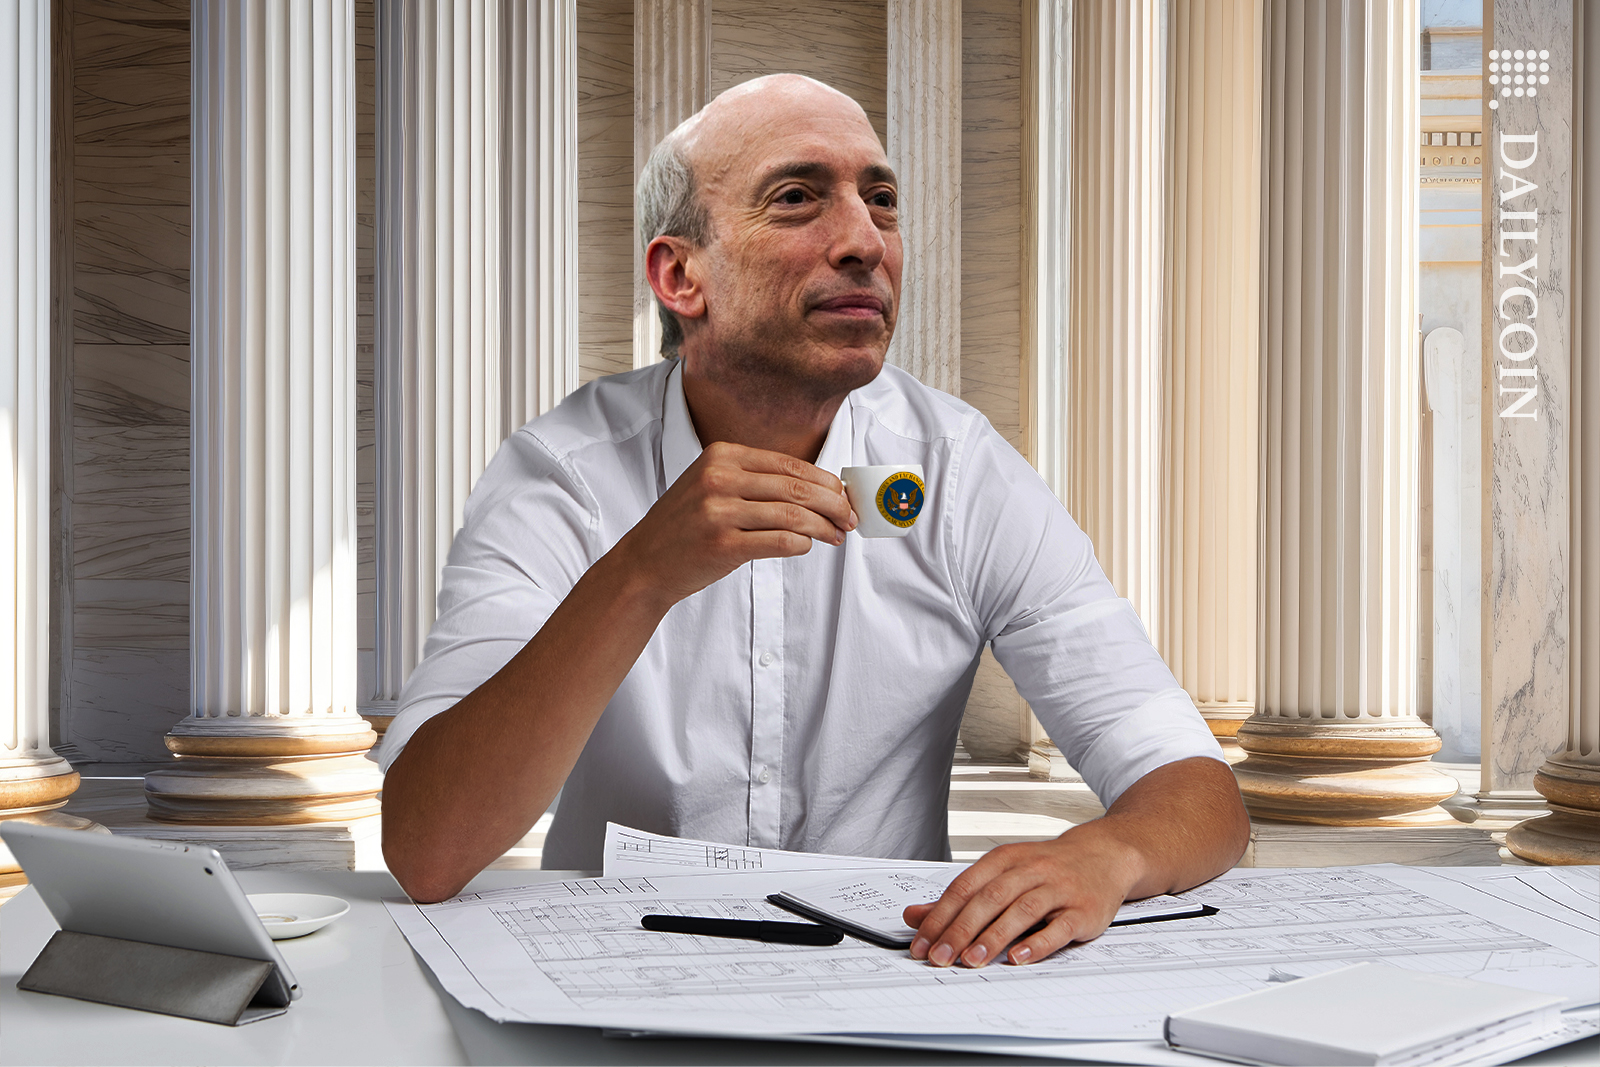 Gary Gensler has some plans and documents to go over for court.